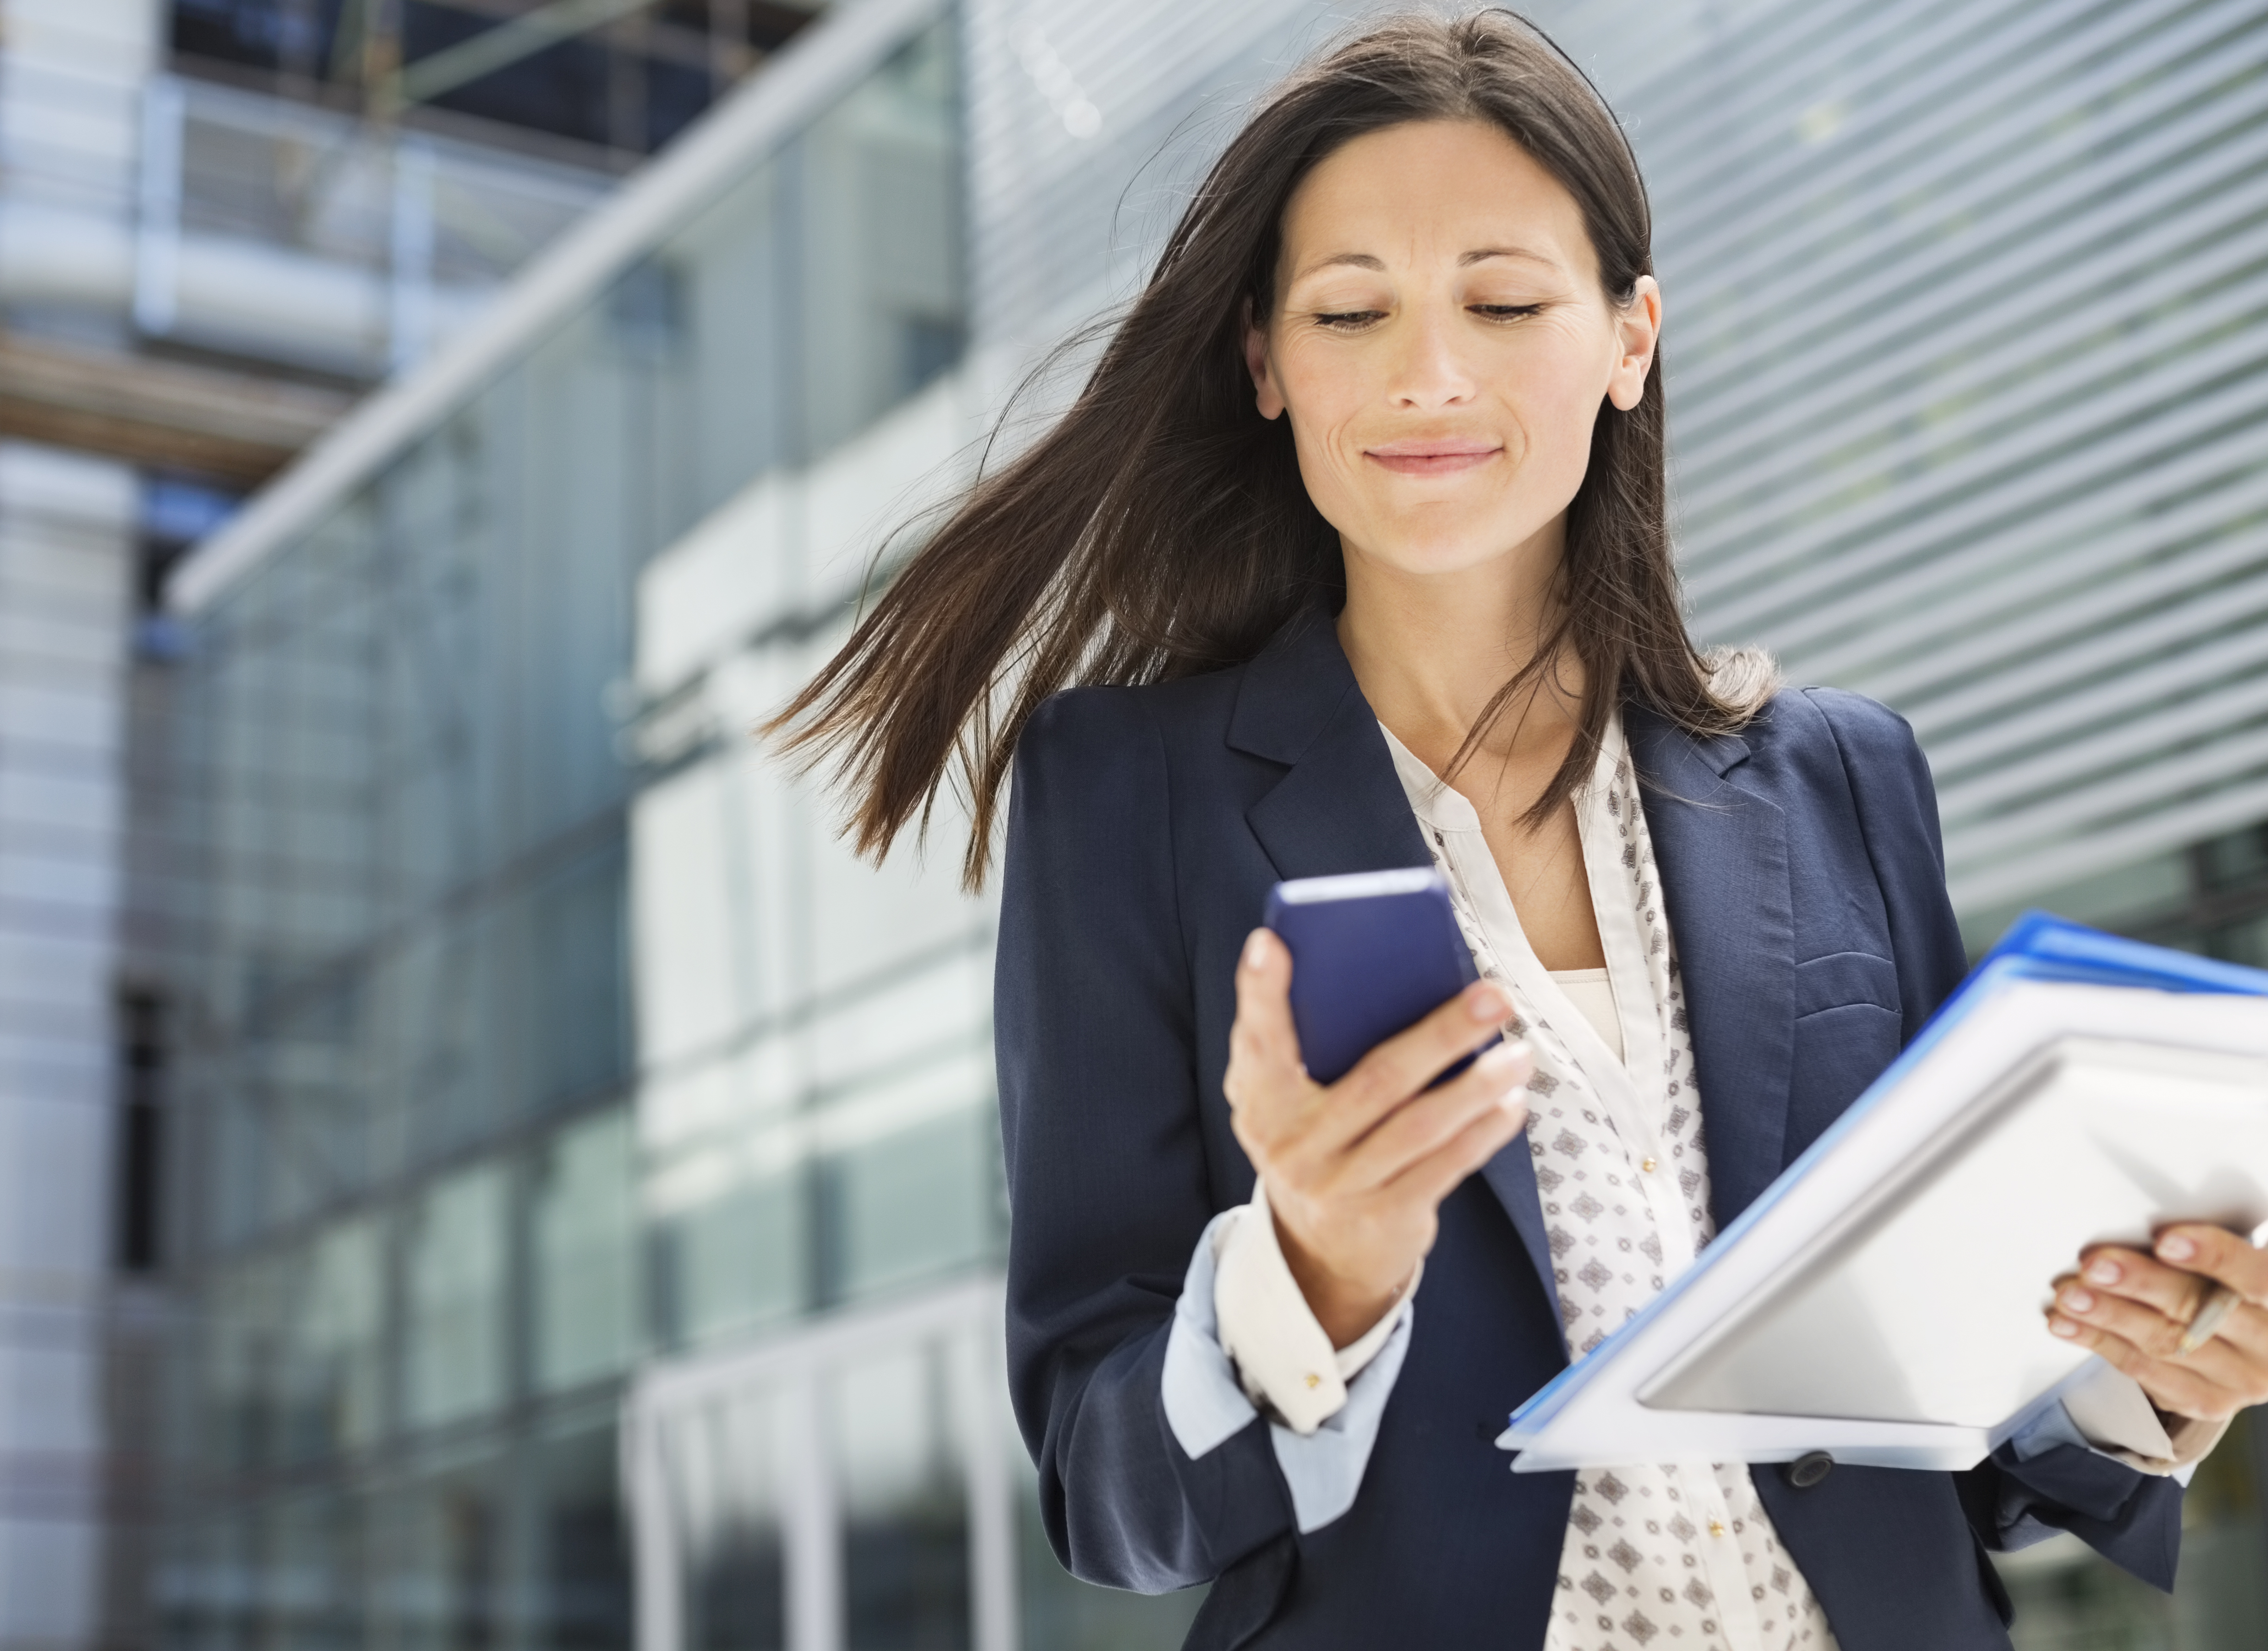 Businesswoman carrying documents and looking at phone